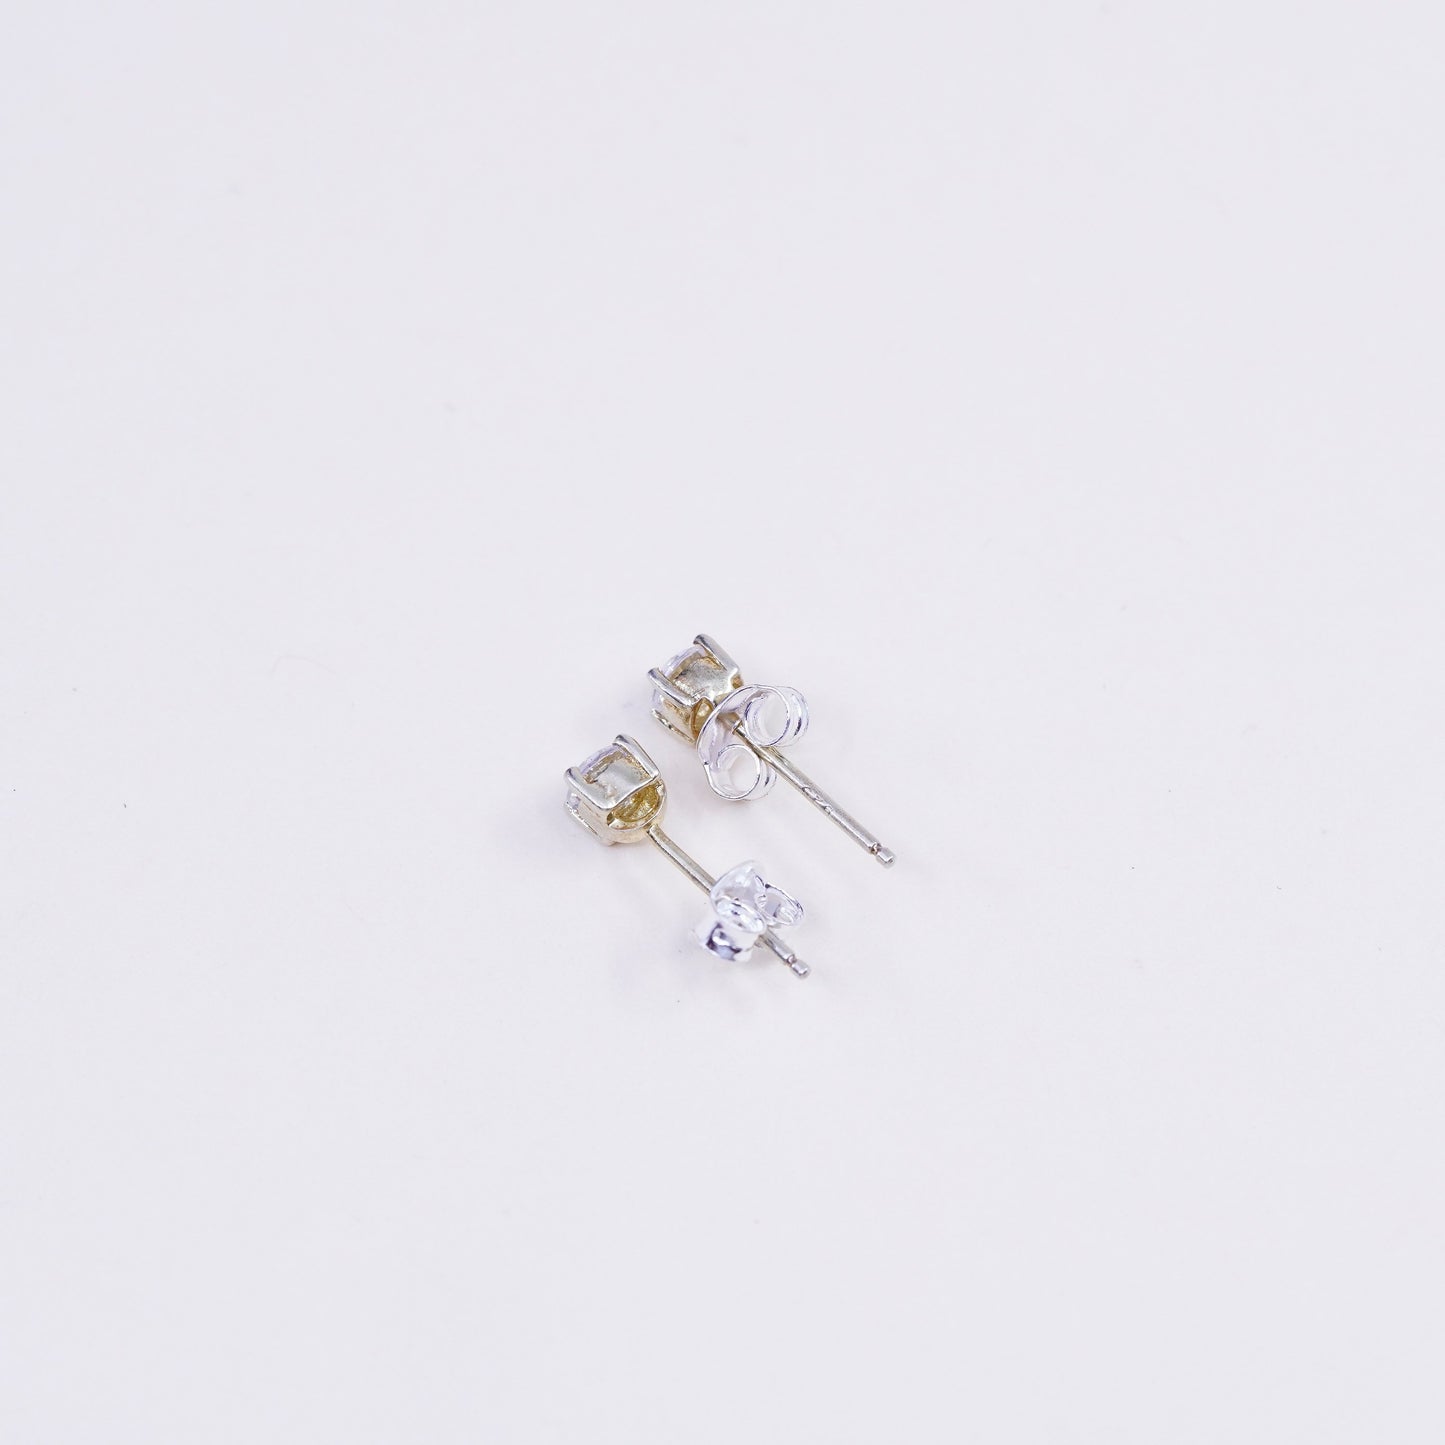 3mm, Vintage gold over sterling 925 silver cz studs, minimalist earrings